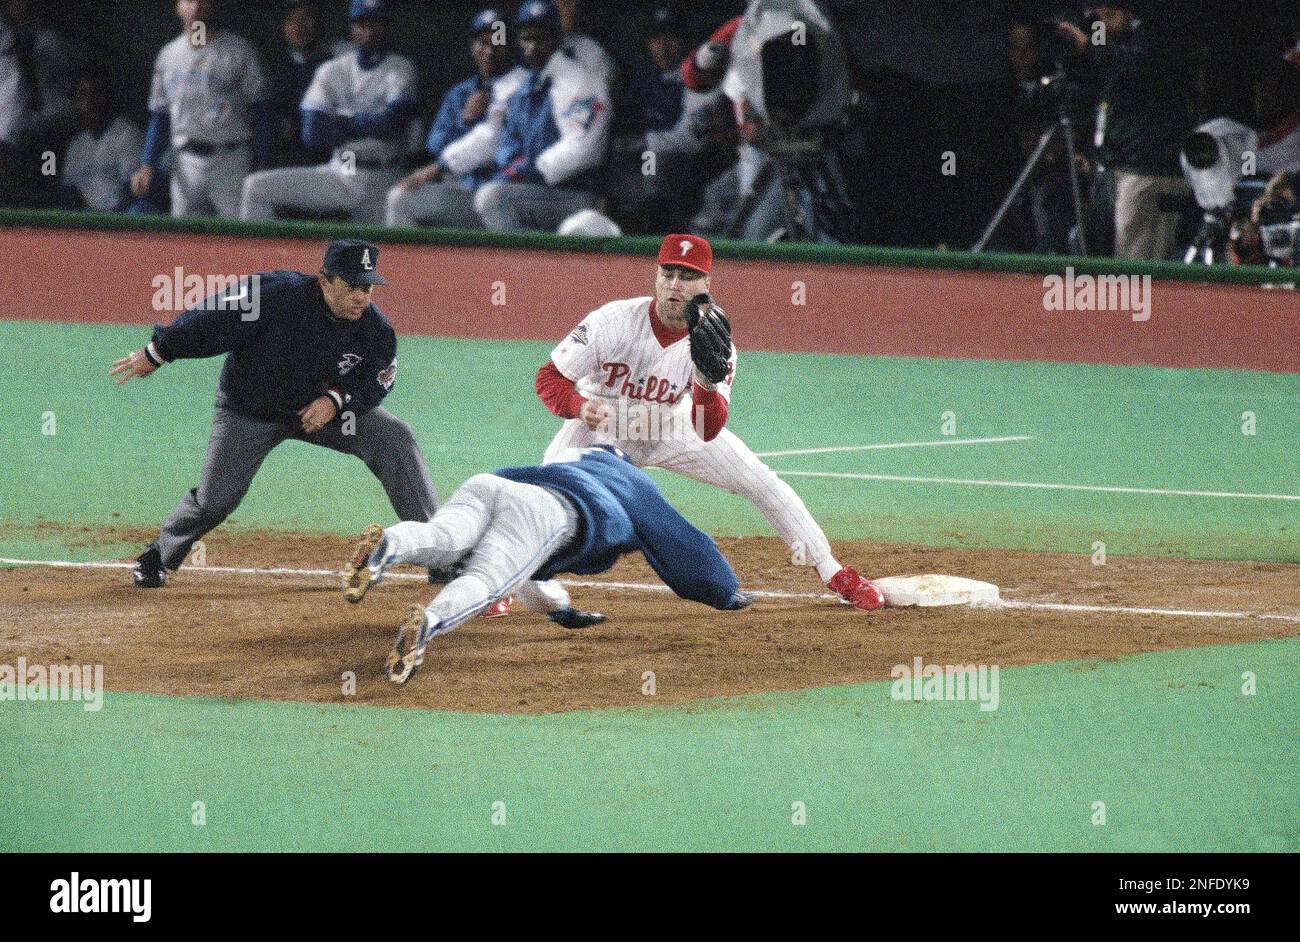 October 20th, 1993 - World Series - Game 4 - Blue Jays vs Phillies 